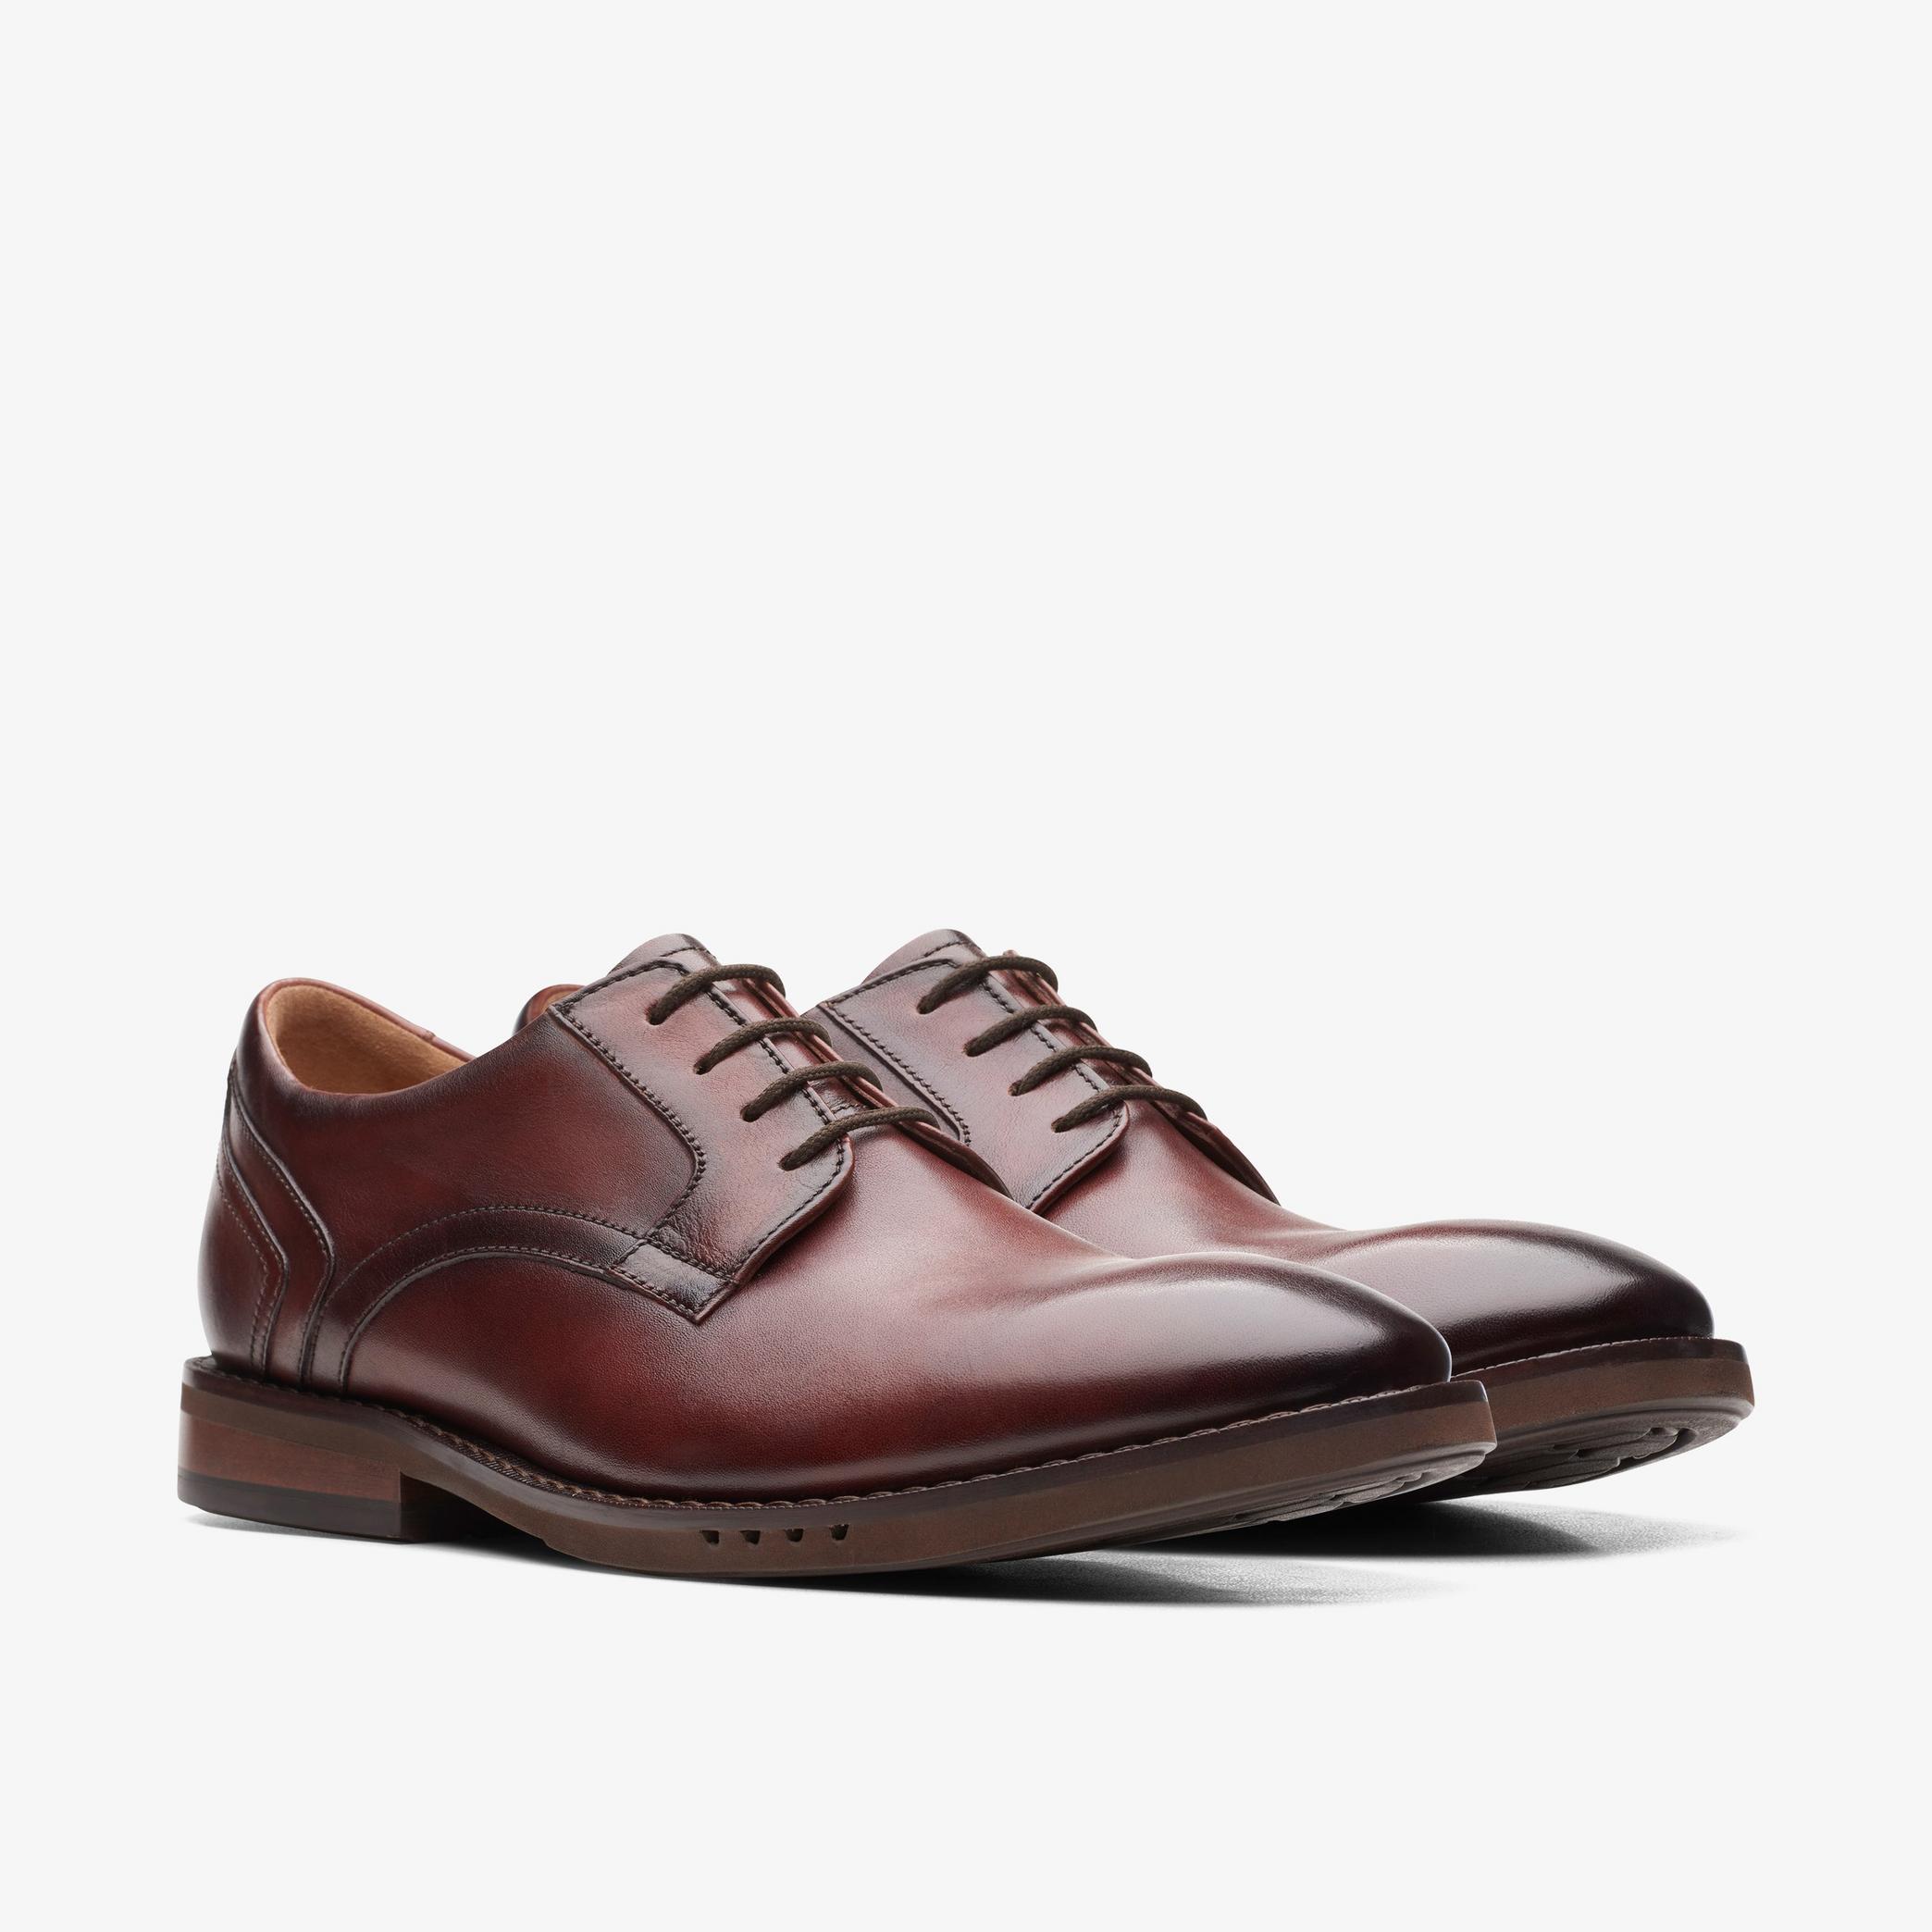 Un Hugh Lace Brown Leather Oxford Shoes, view 5 of 8